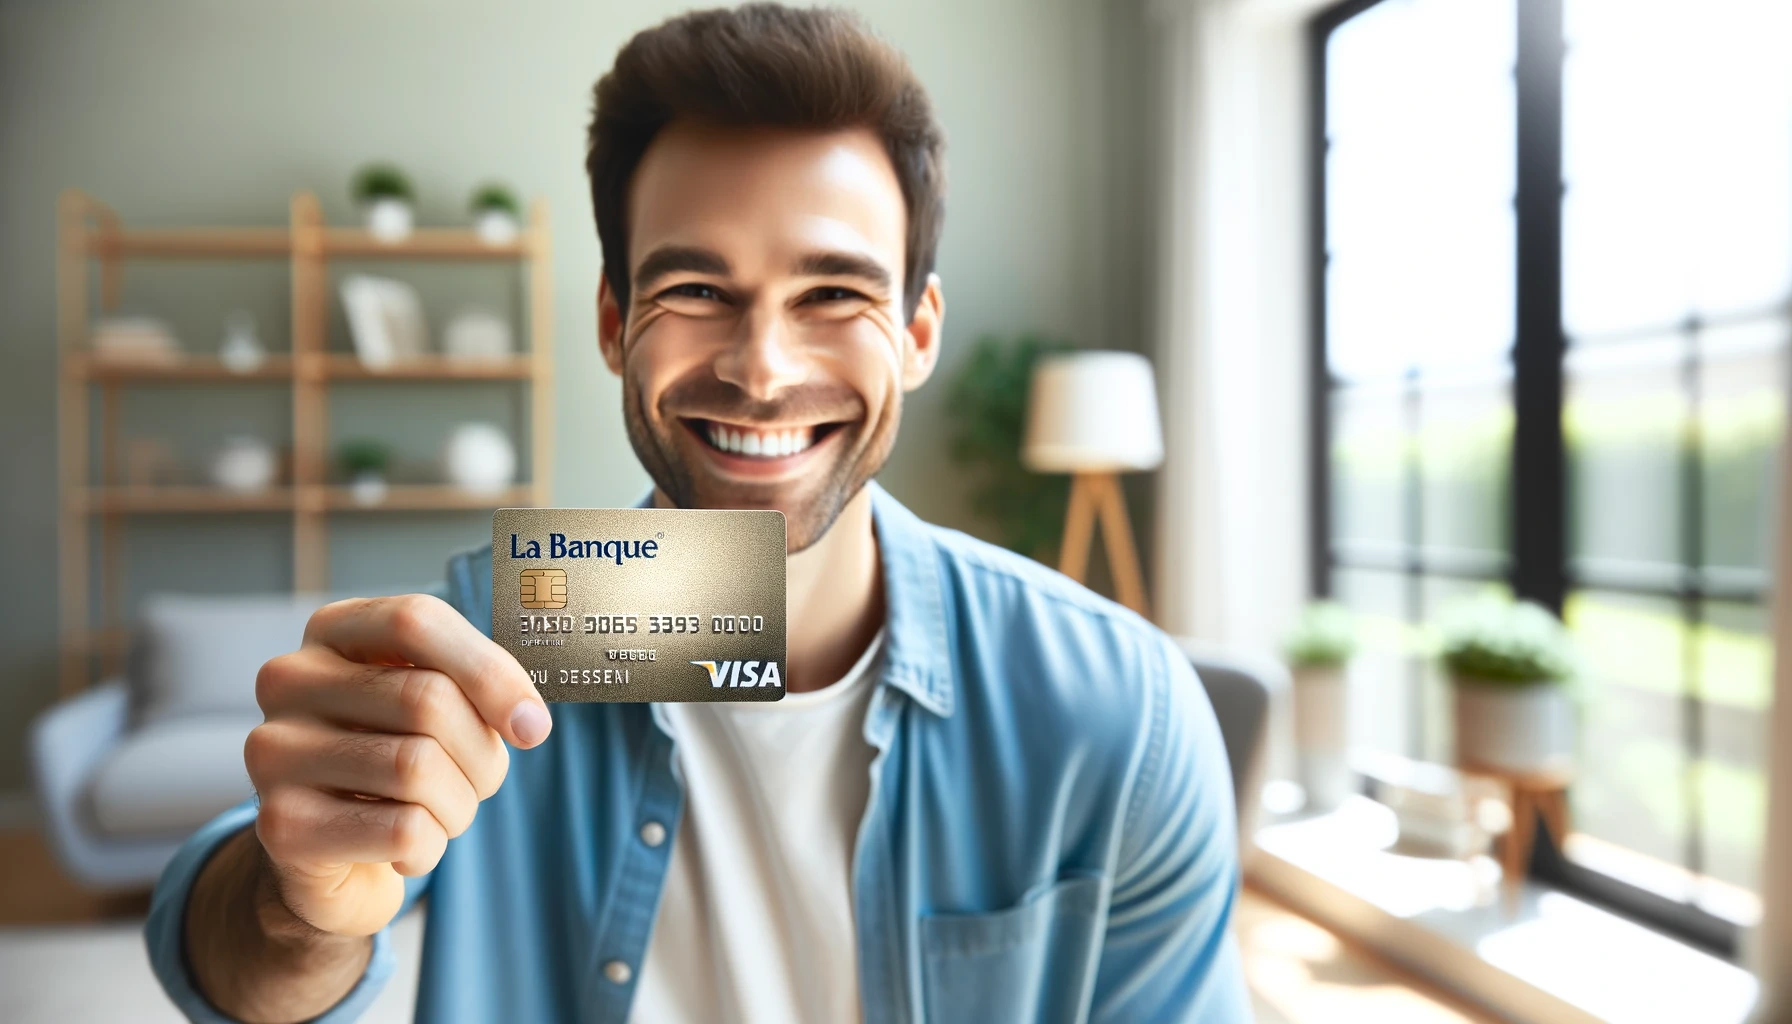 Learn How to Apply for the La Banque Postale Visa Classic Credit Card